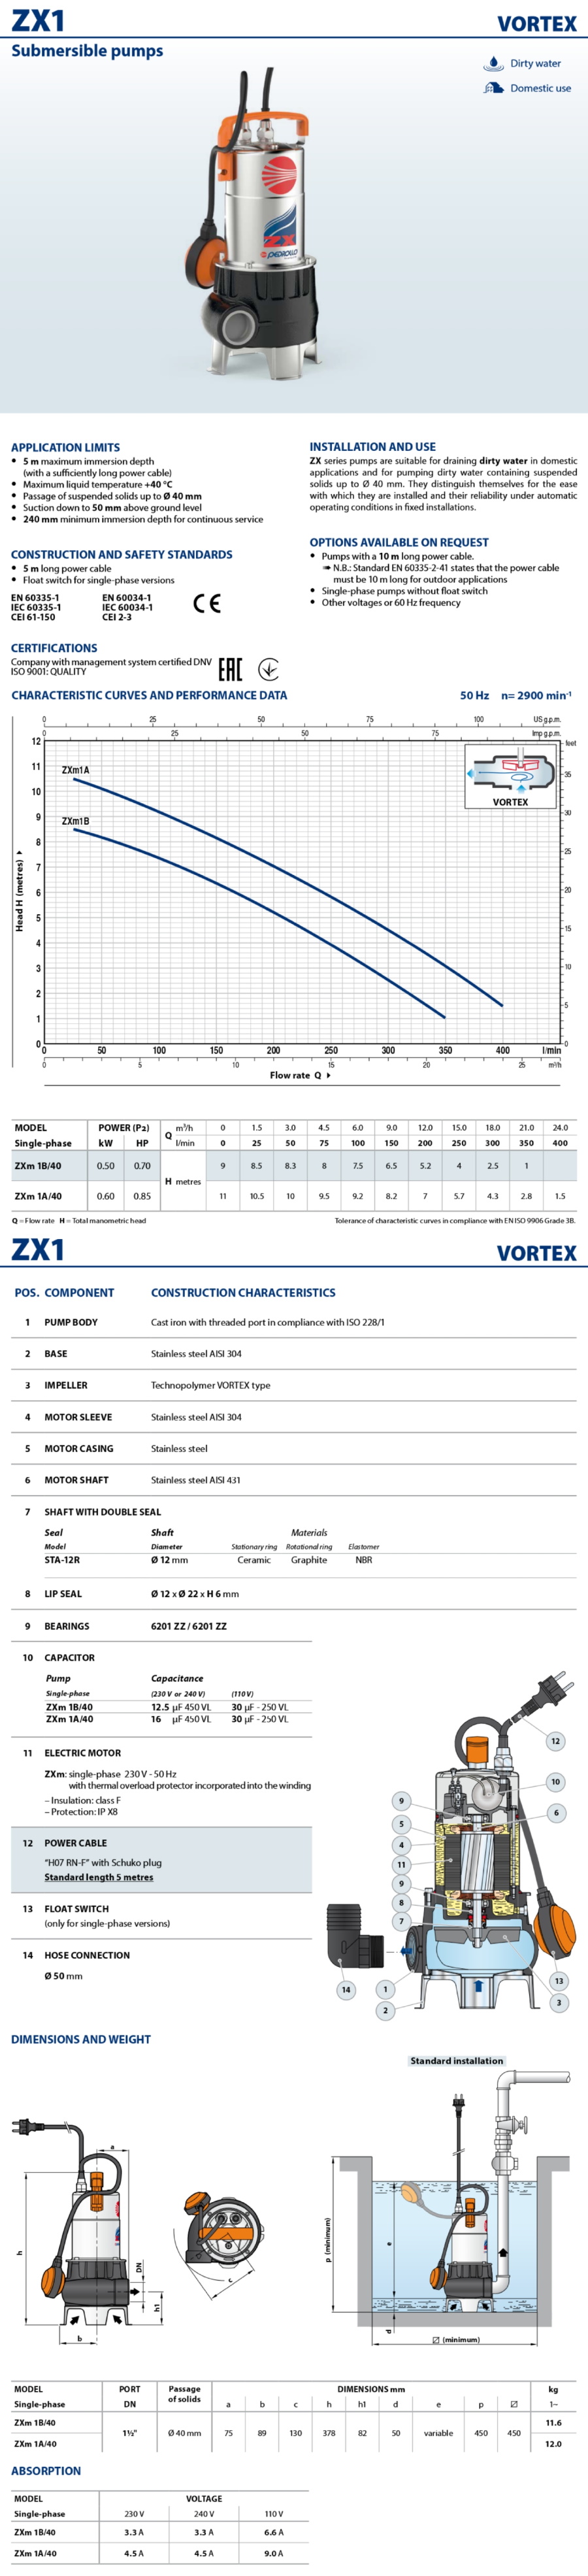 VORTEX Submersible Pump for Very Dirty Water ZXm 1A/40 5M 0,85Hp 240V Pedrollo 